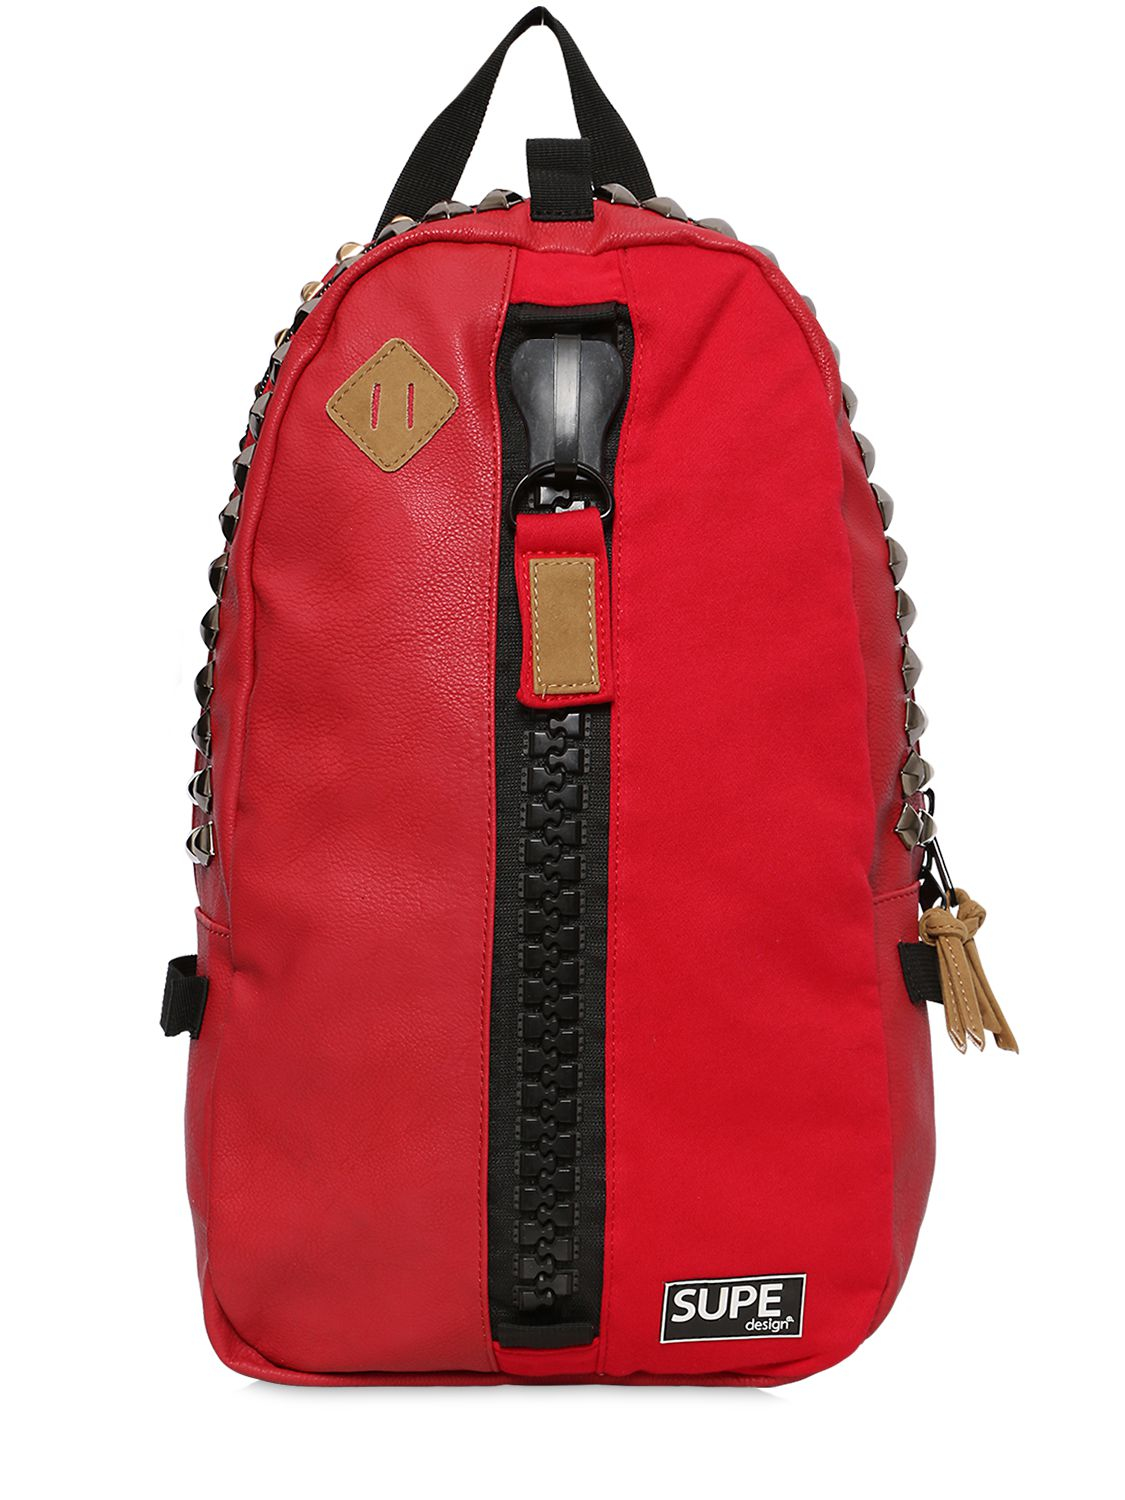 Lyst - Supe Design Day Studded Faux Leather Backpack in Red for Men